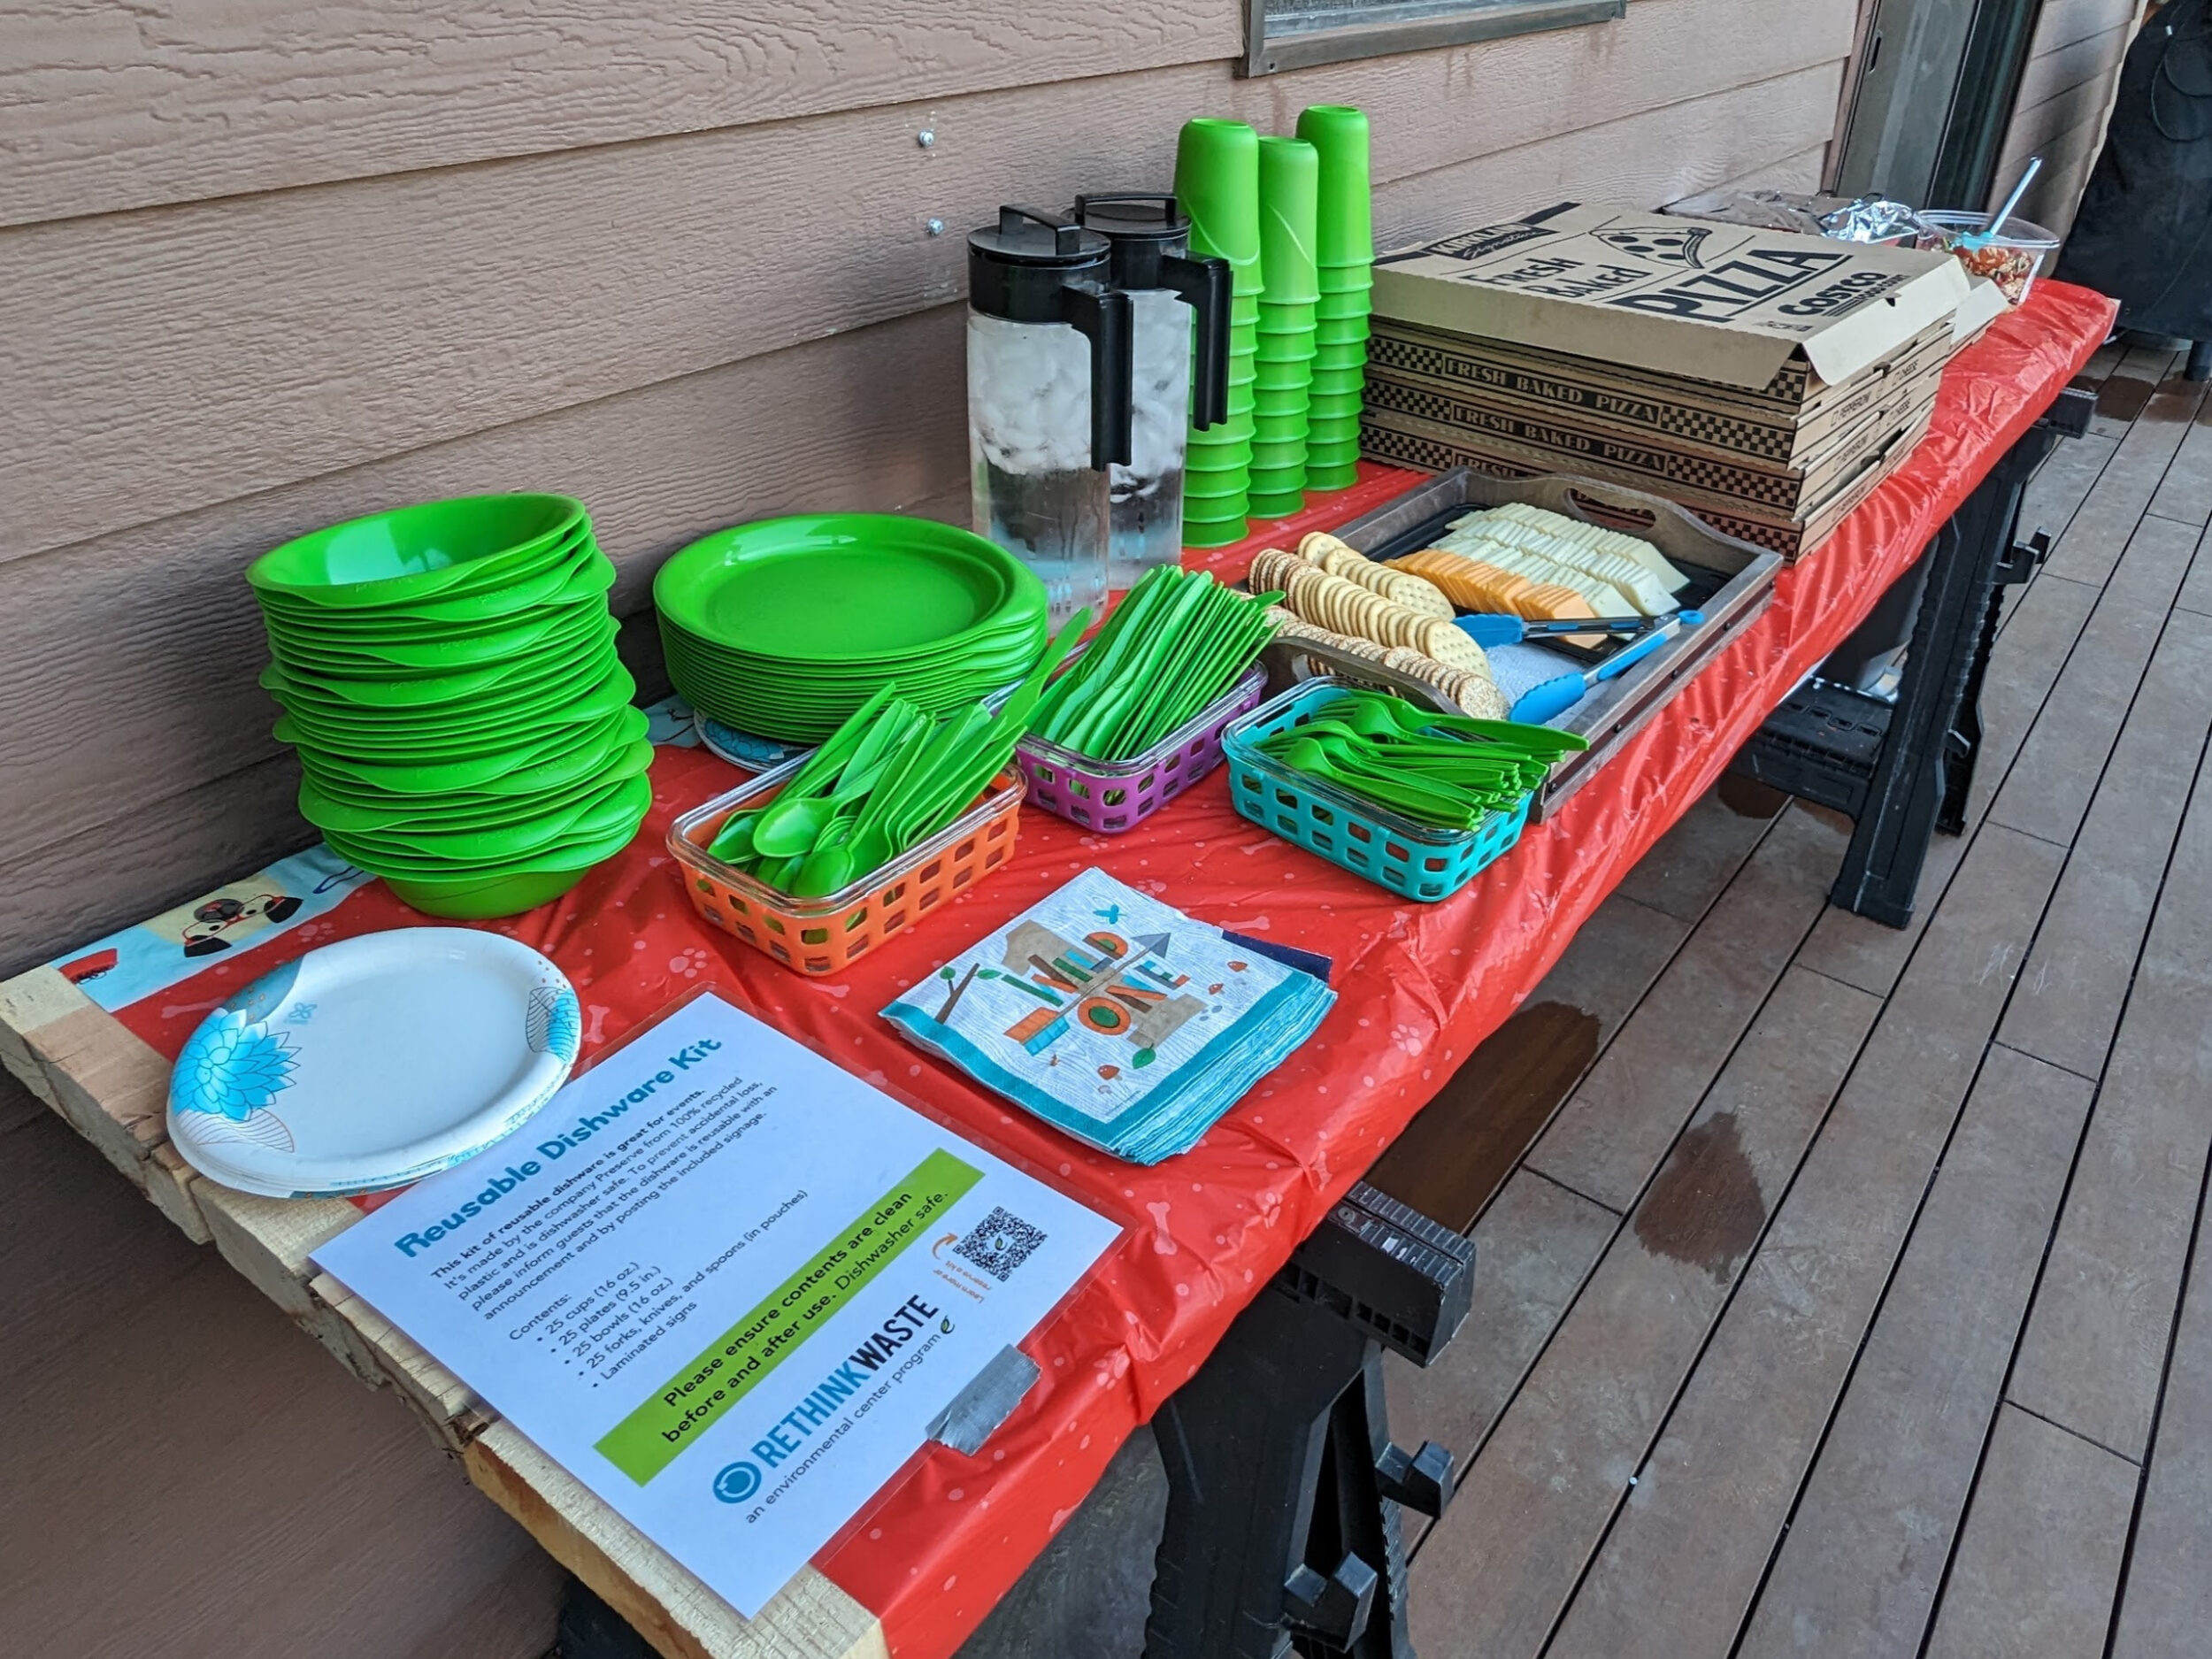 a long table set up for a birthday party with green reusable dishware. there are pizza boxes and cheese and crackers on the table.